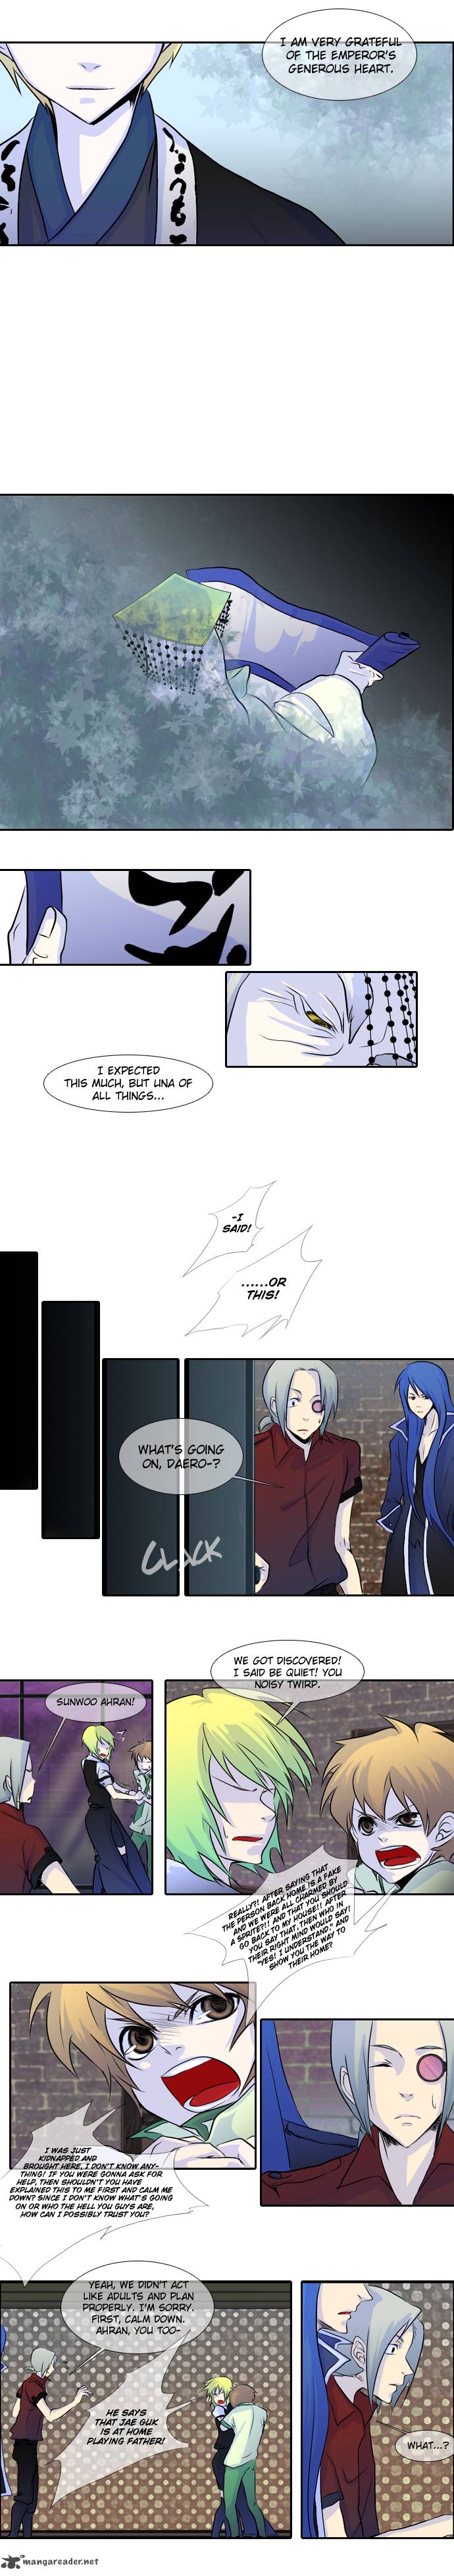 Timeline Chapter 10 Page 5